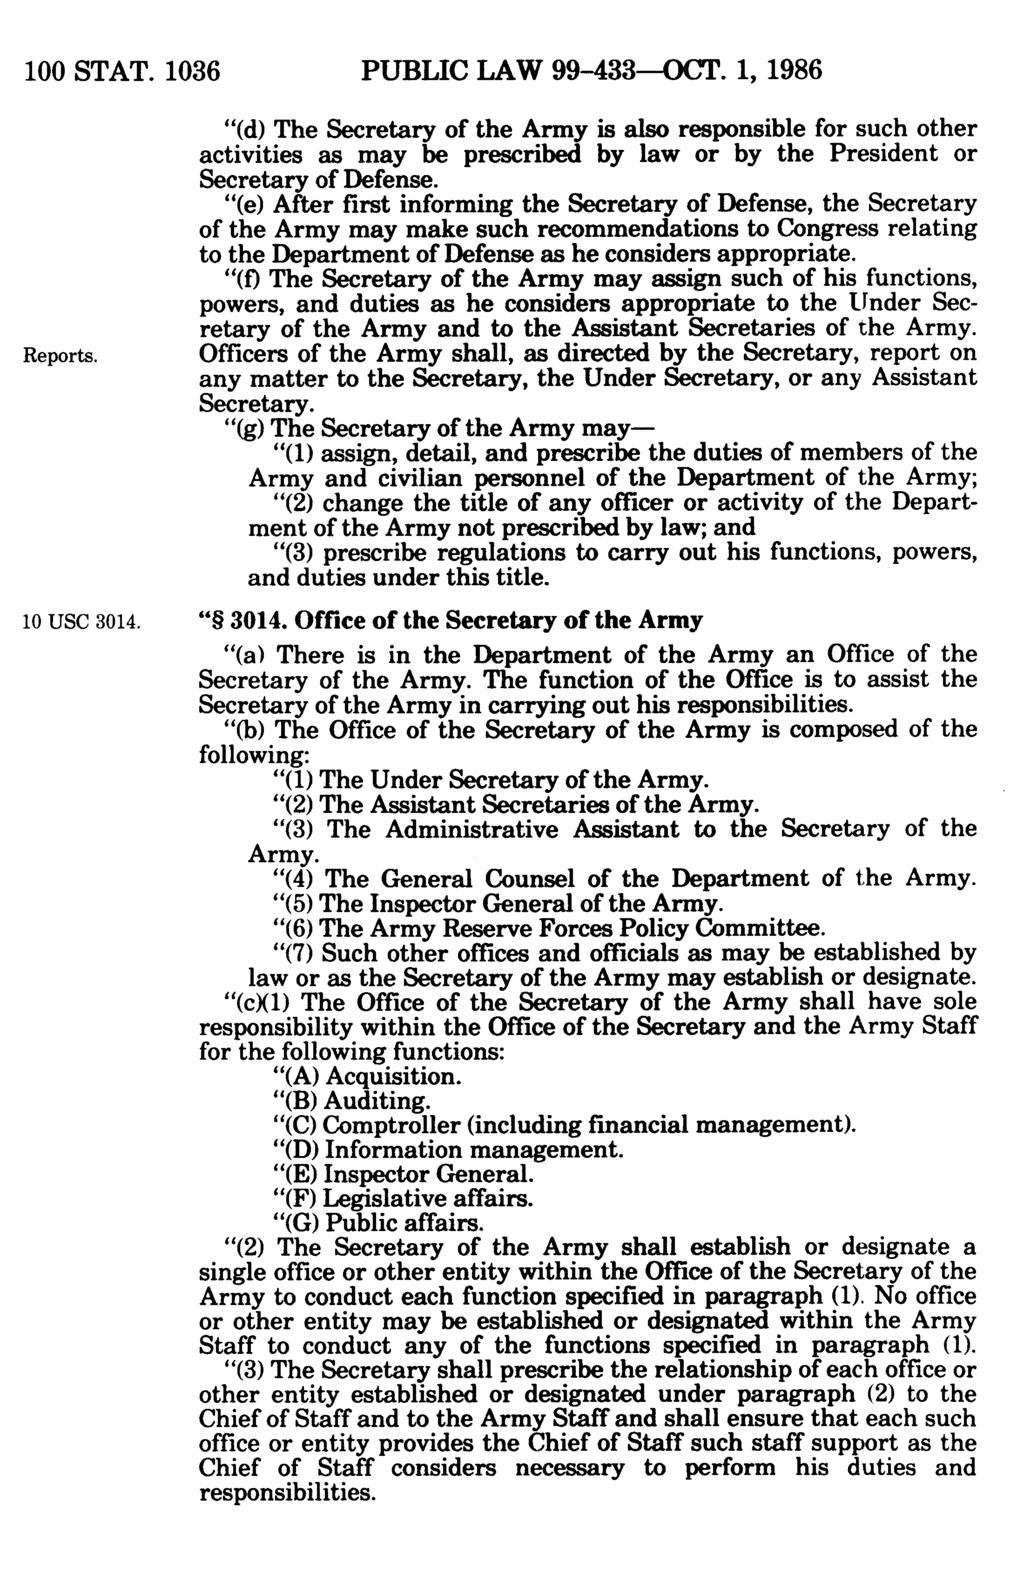 100 STAT. 1036 PUBLIC LAW 99-433-OCT. 1,1986 (d) The Secretary of the Army is also responsible for such other activities as may be prescribed by law or by the President or Secretary of Defense.